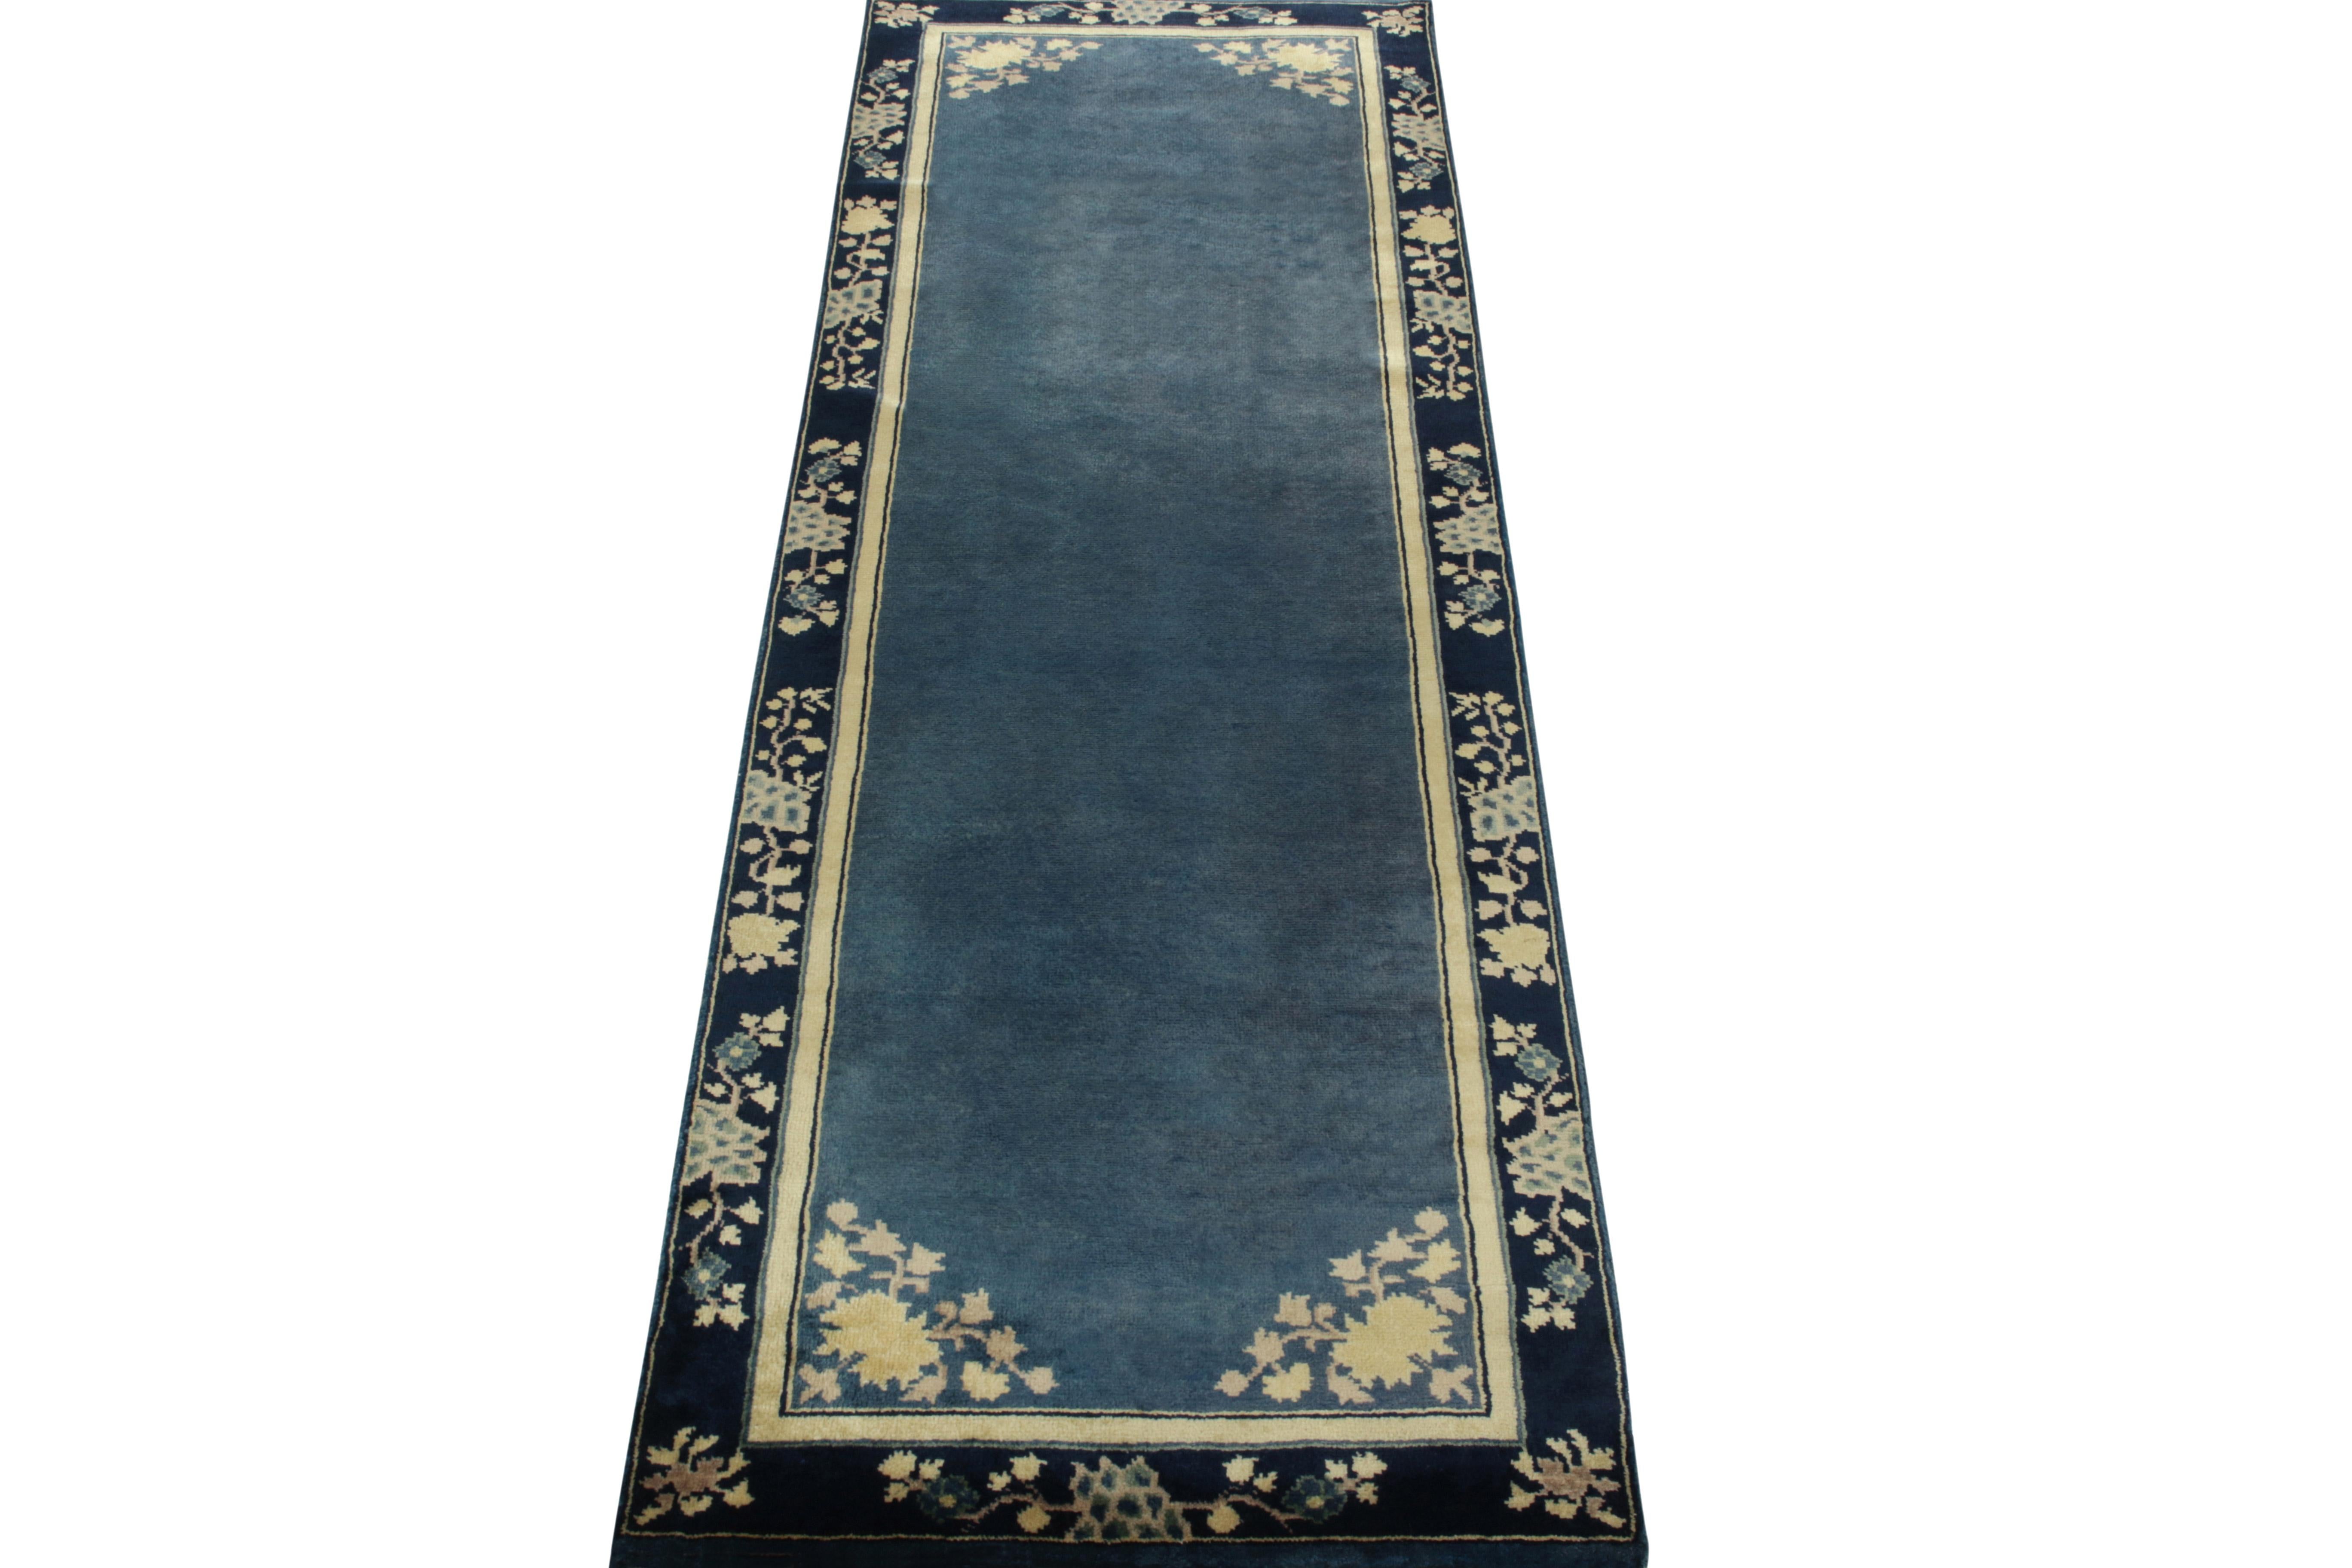 A 3x8 hand-knotted vintage runner connoting Chinese art deco inspirations of the 1920s, from the newest line in Rug & Kilim’s Antique & Vintage collection. The clean blue open field enjoys light dark spots for an interesting visual appeal on scale